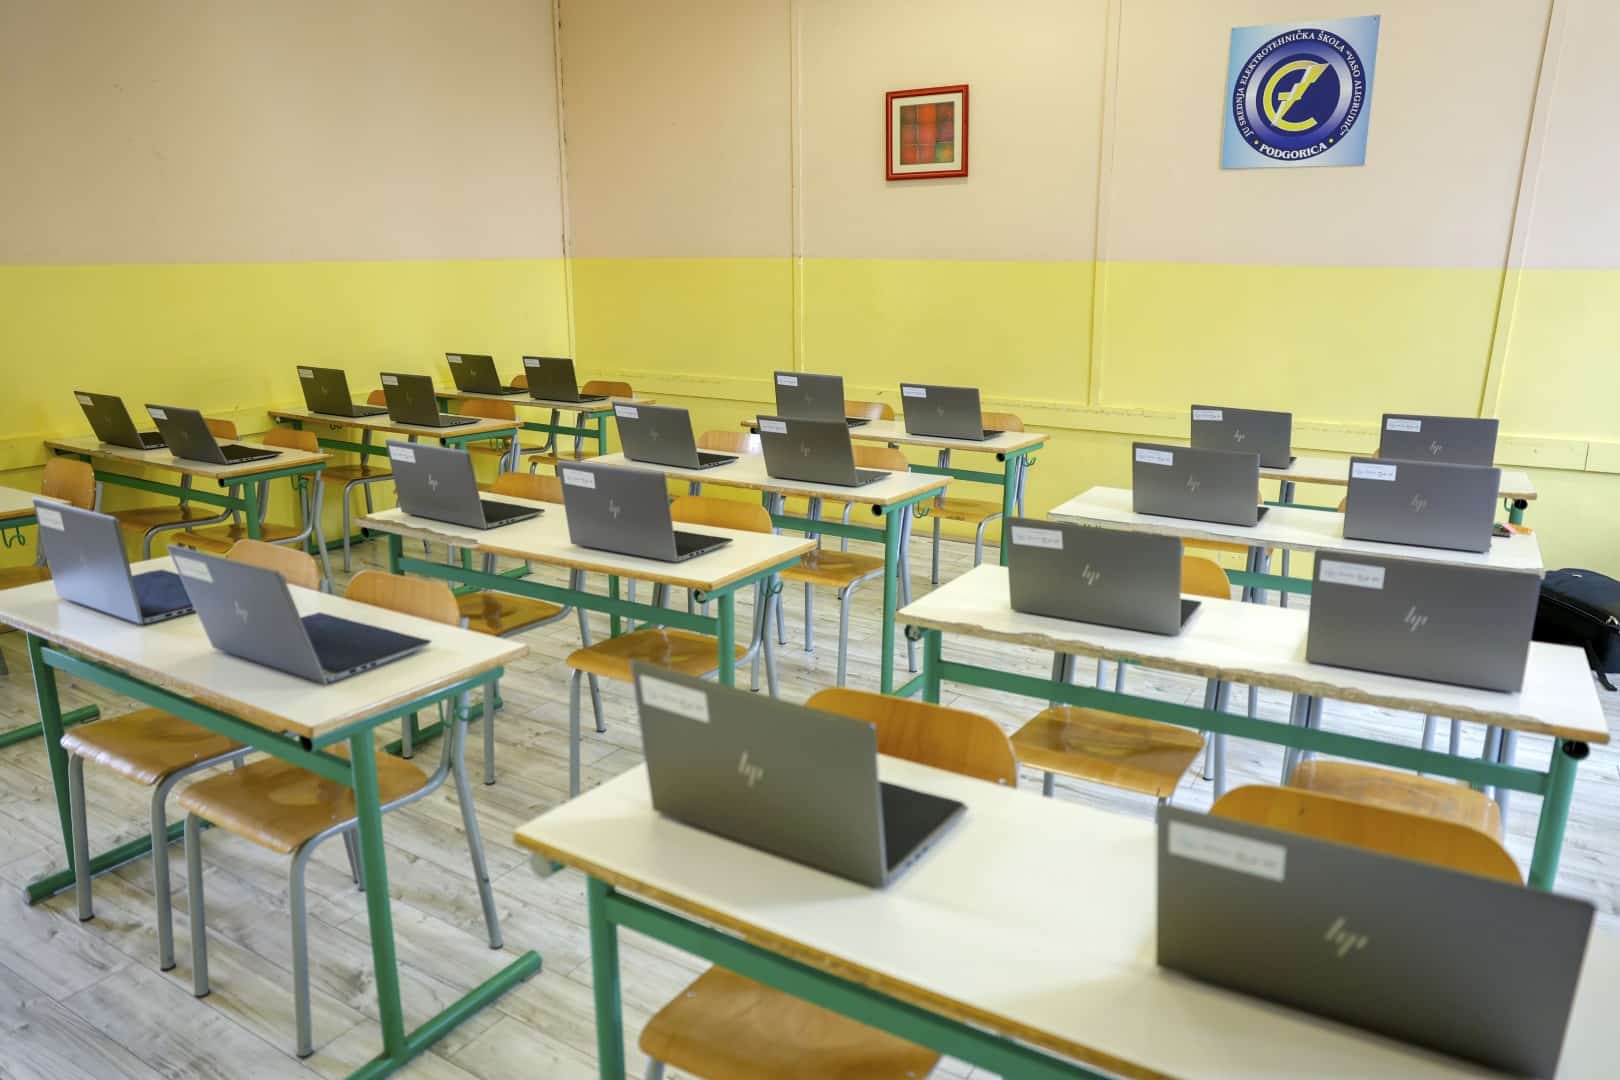 The Regional Challenge Fund donated new computer equipment to the Vaso Aligrudić Secondary Electrotechnical School in Podgorica